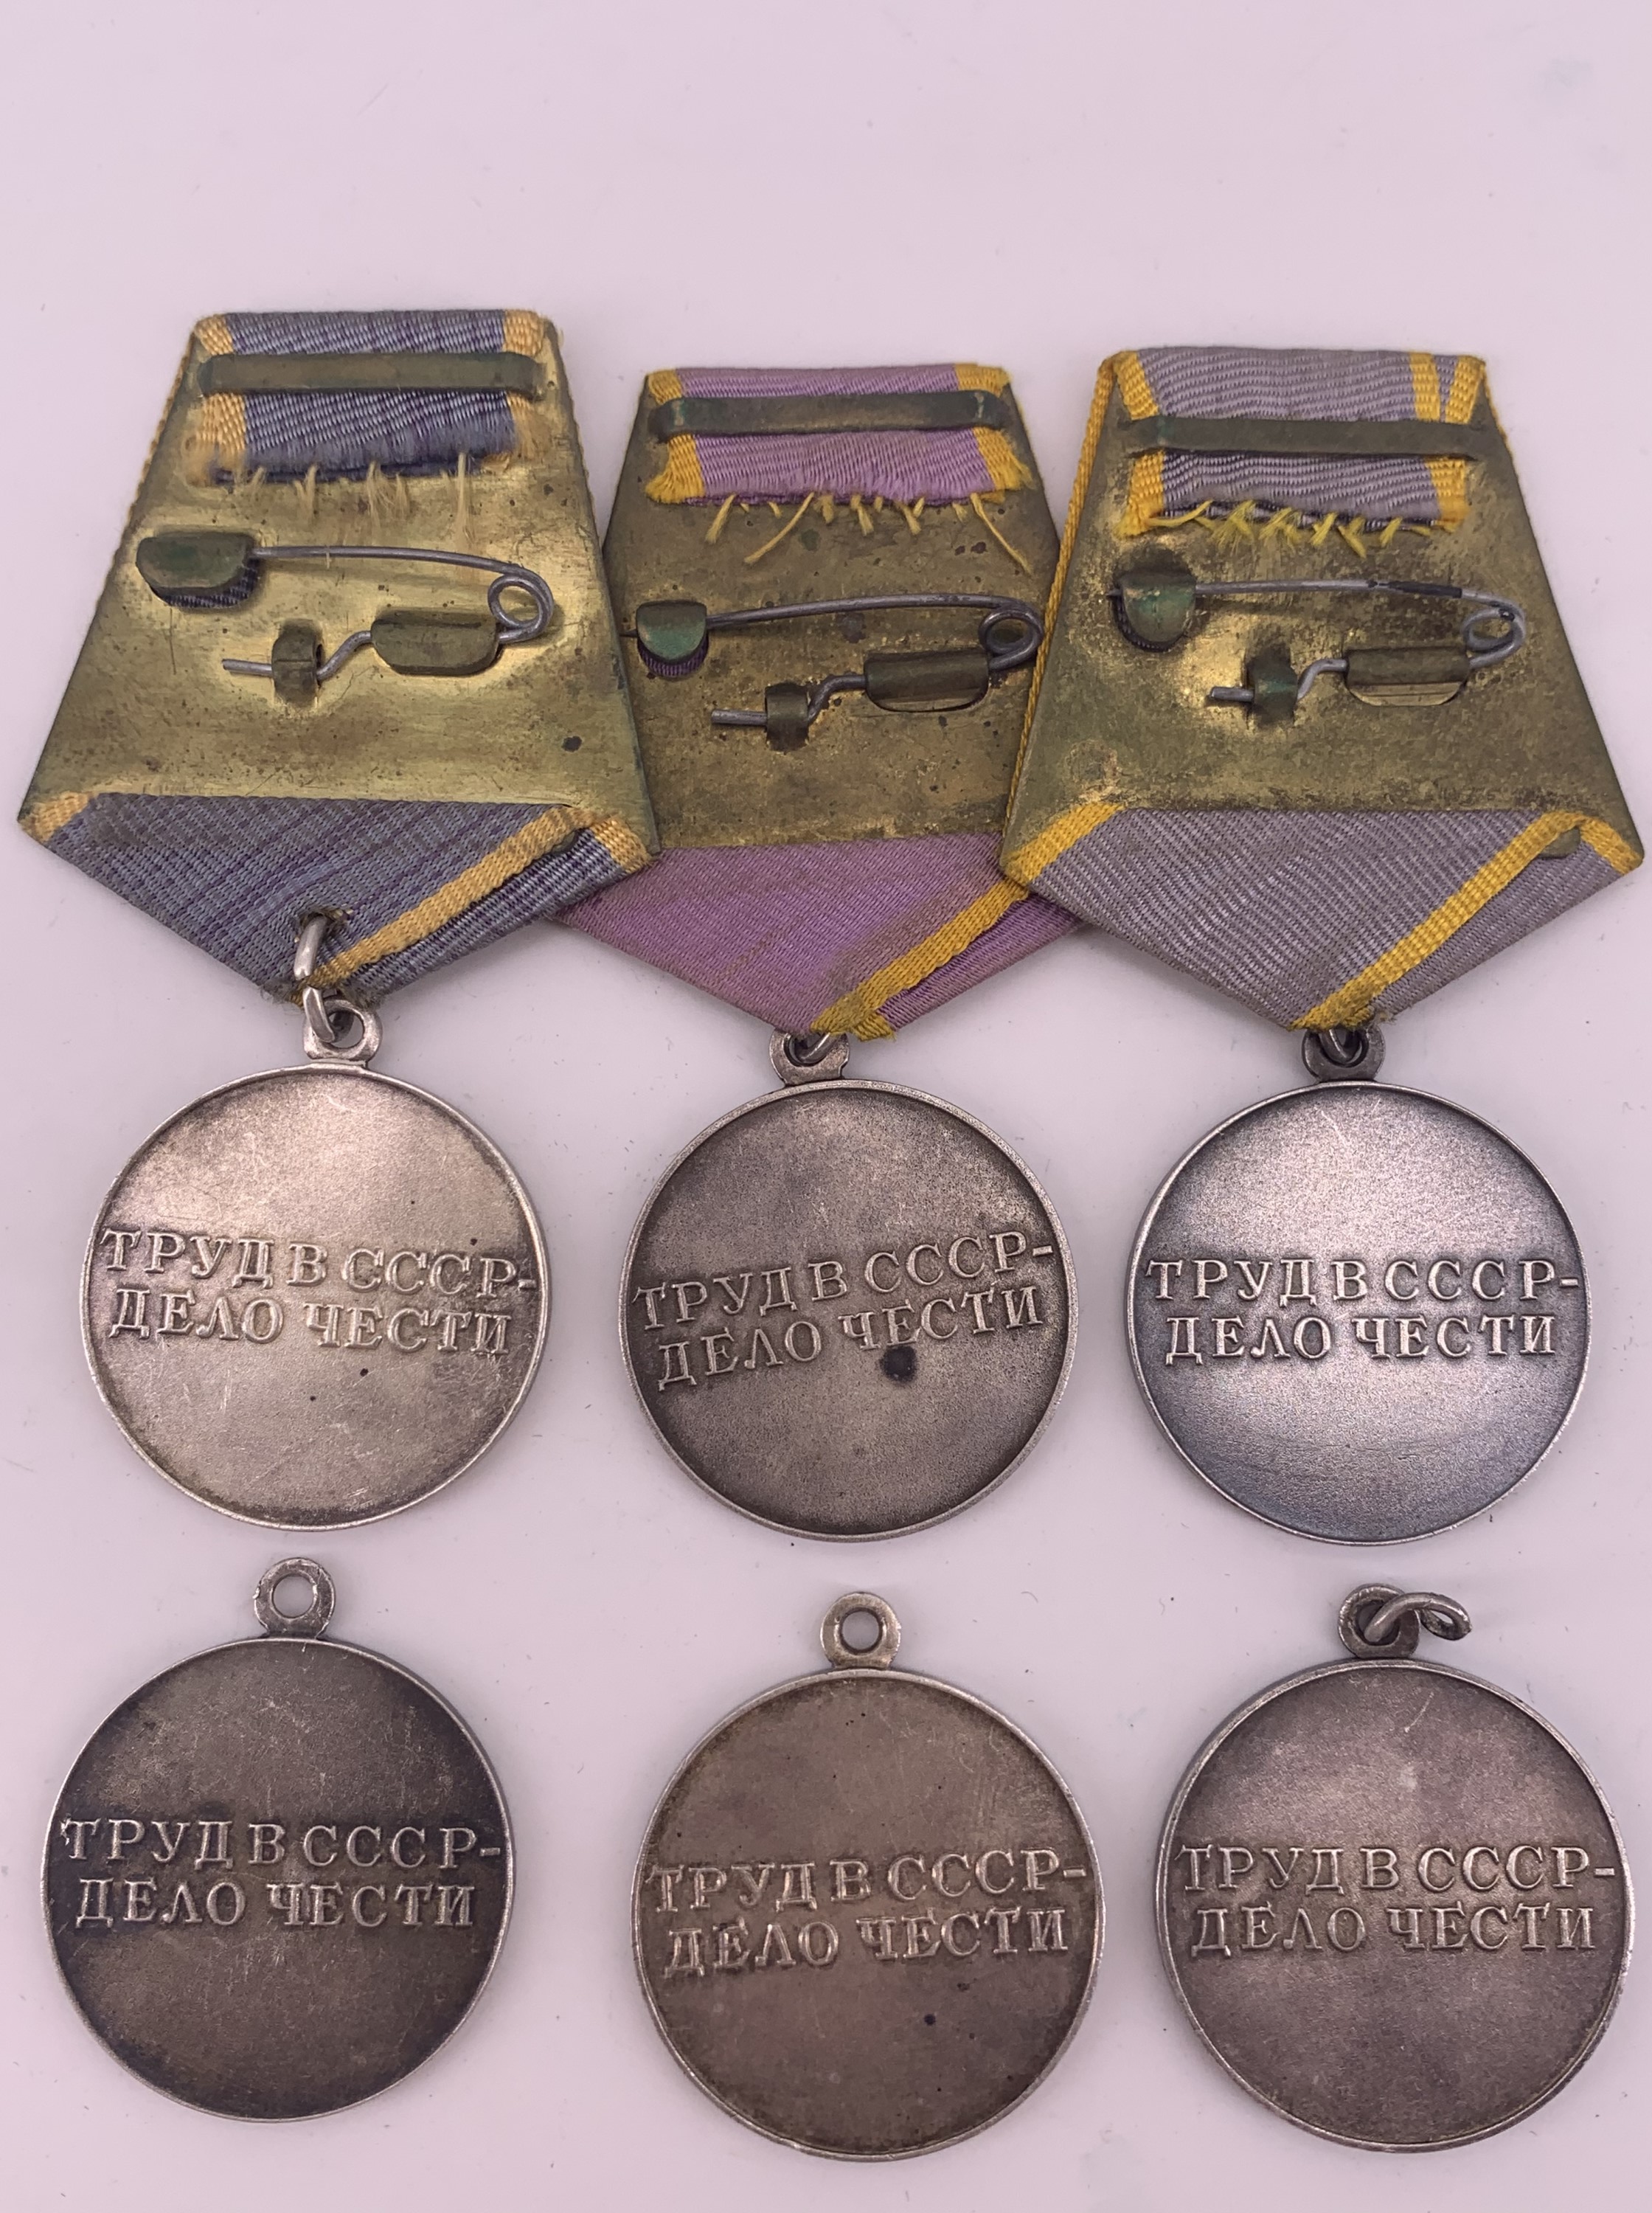 Six Soviet Medals for Distinguished Labour - Image 2 of 2